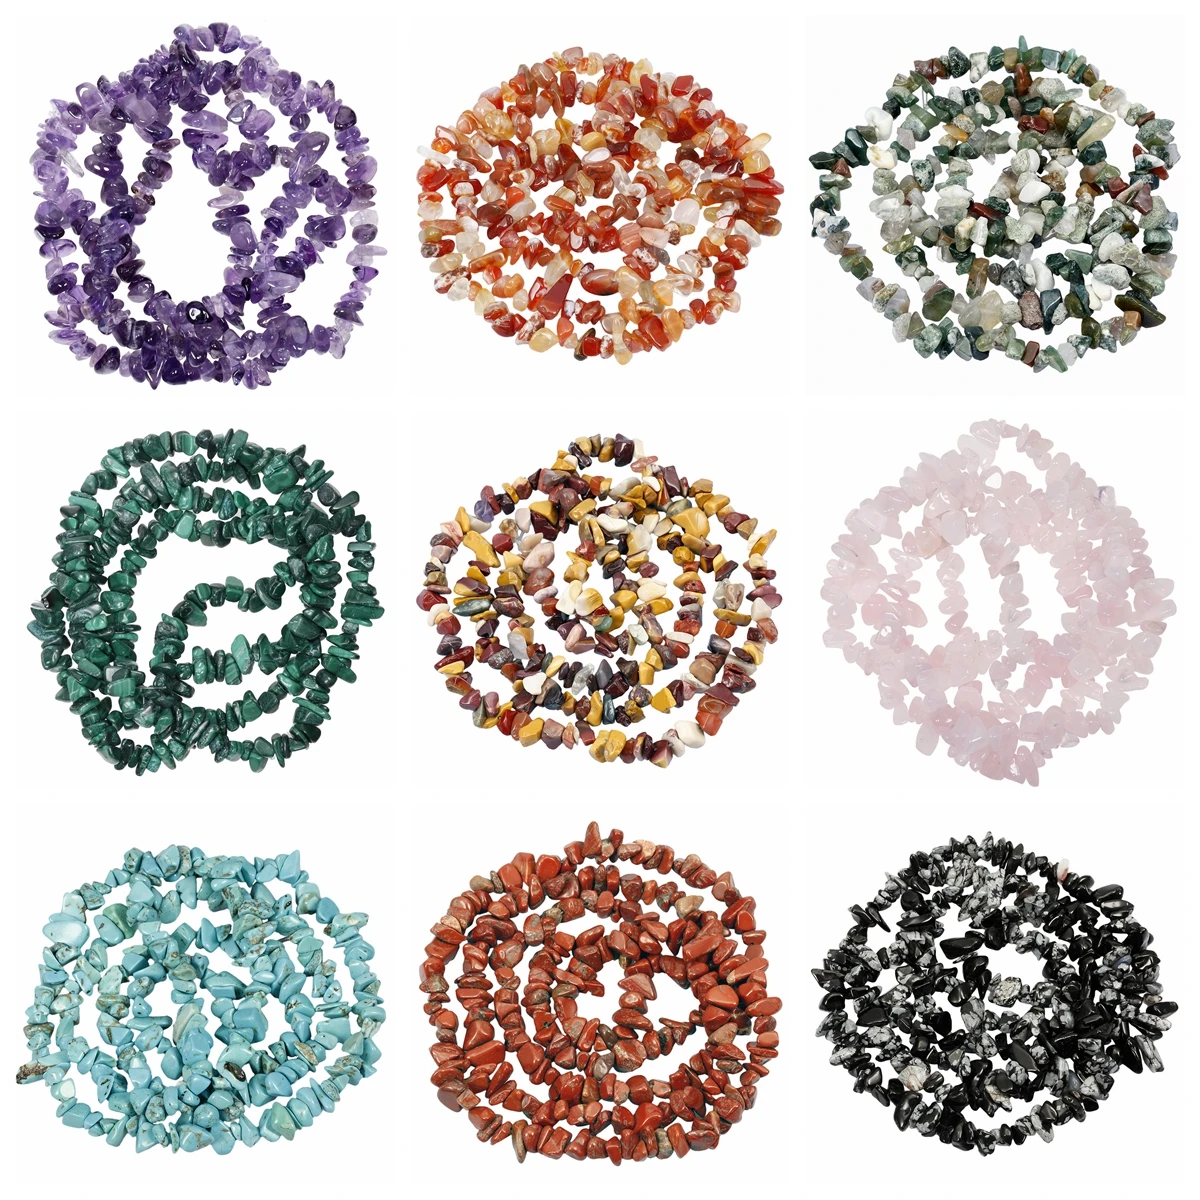 

Loose Natural Chips Gemstone Beads for Jewelry Making Drilled Polishd Irregular Raw Rock Stone Healing Crystal Strands 32 inches